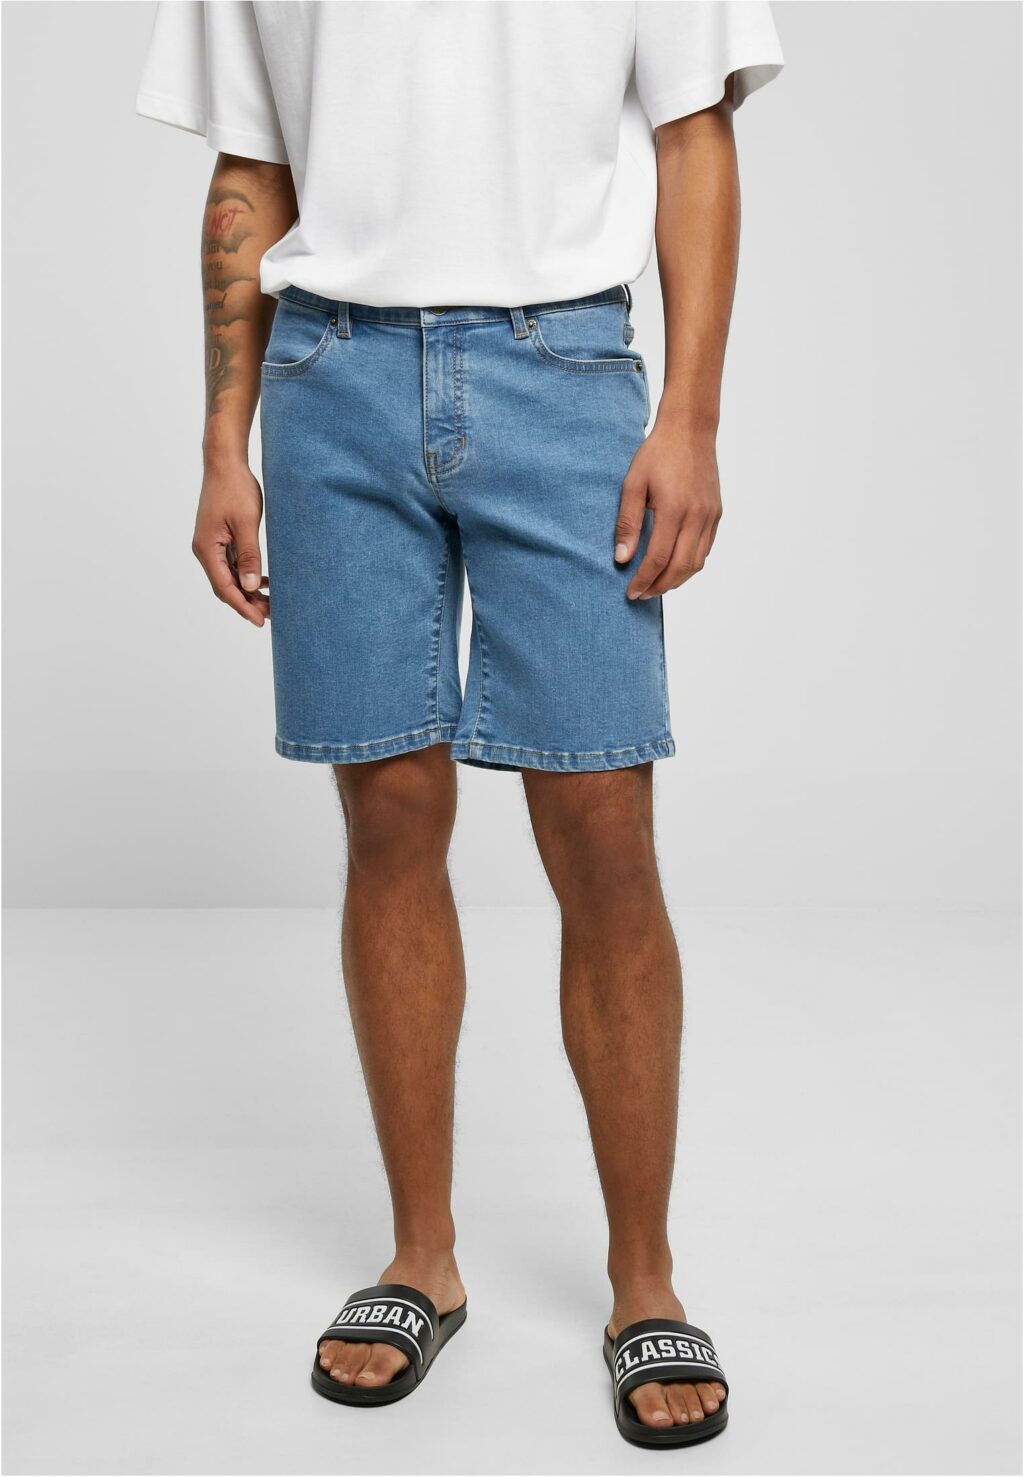 Urban Classics Relaxed Fit Jeans Shorts light blue washed TB4156